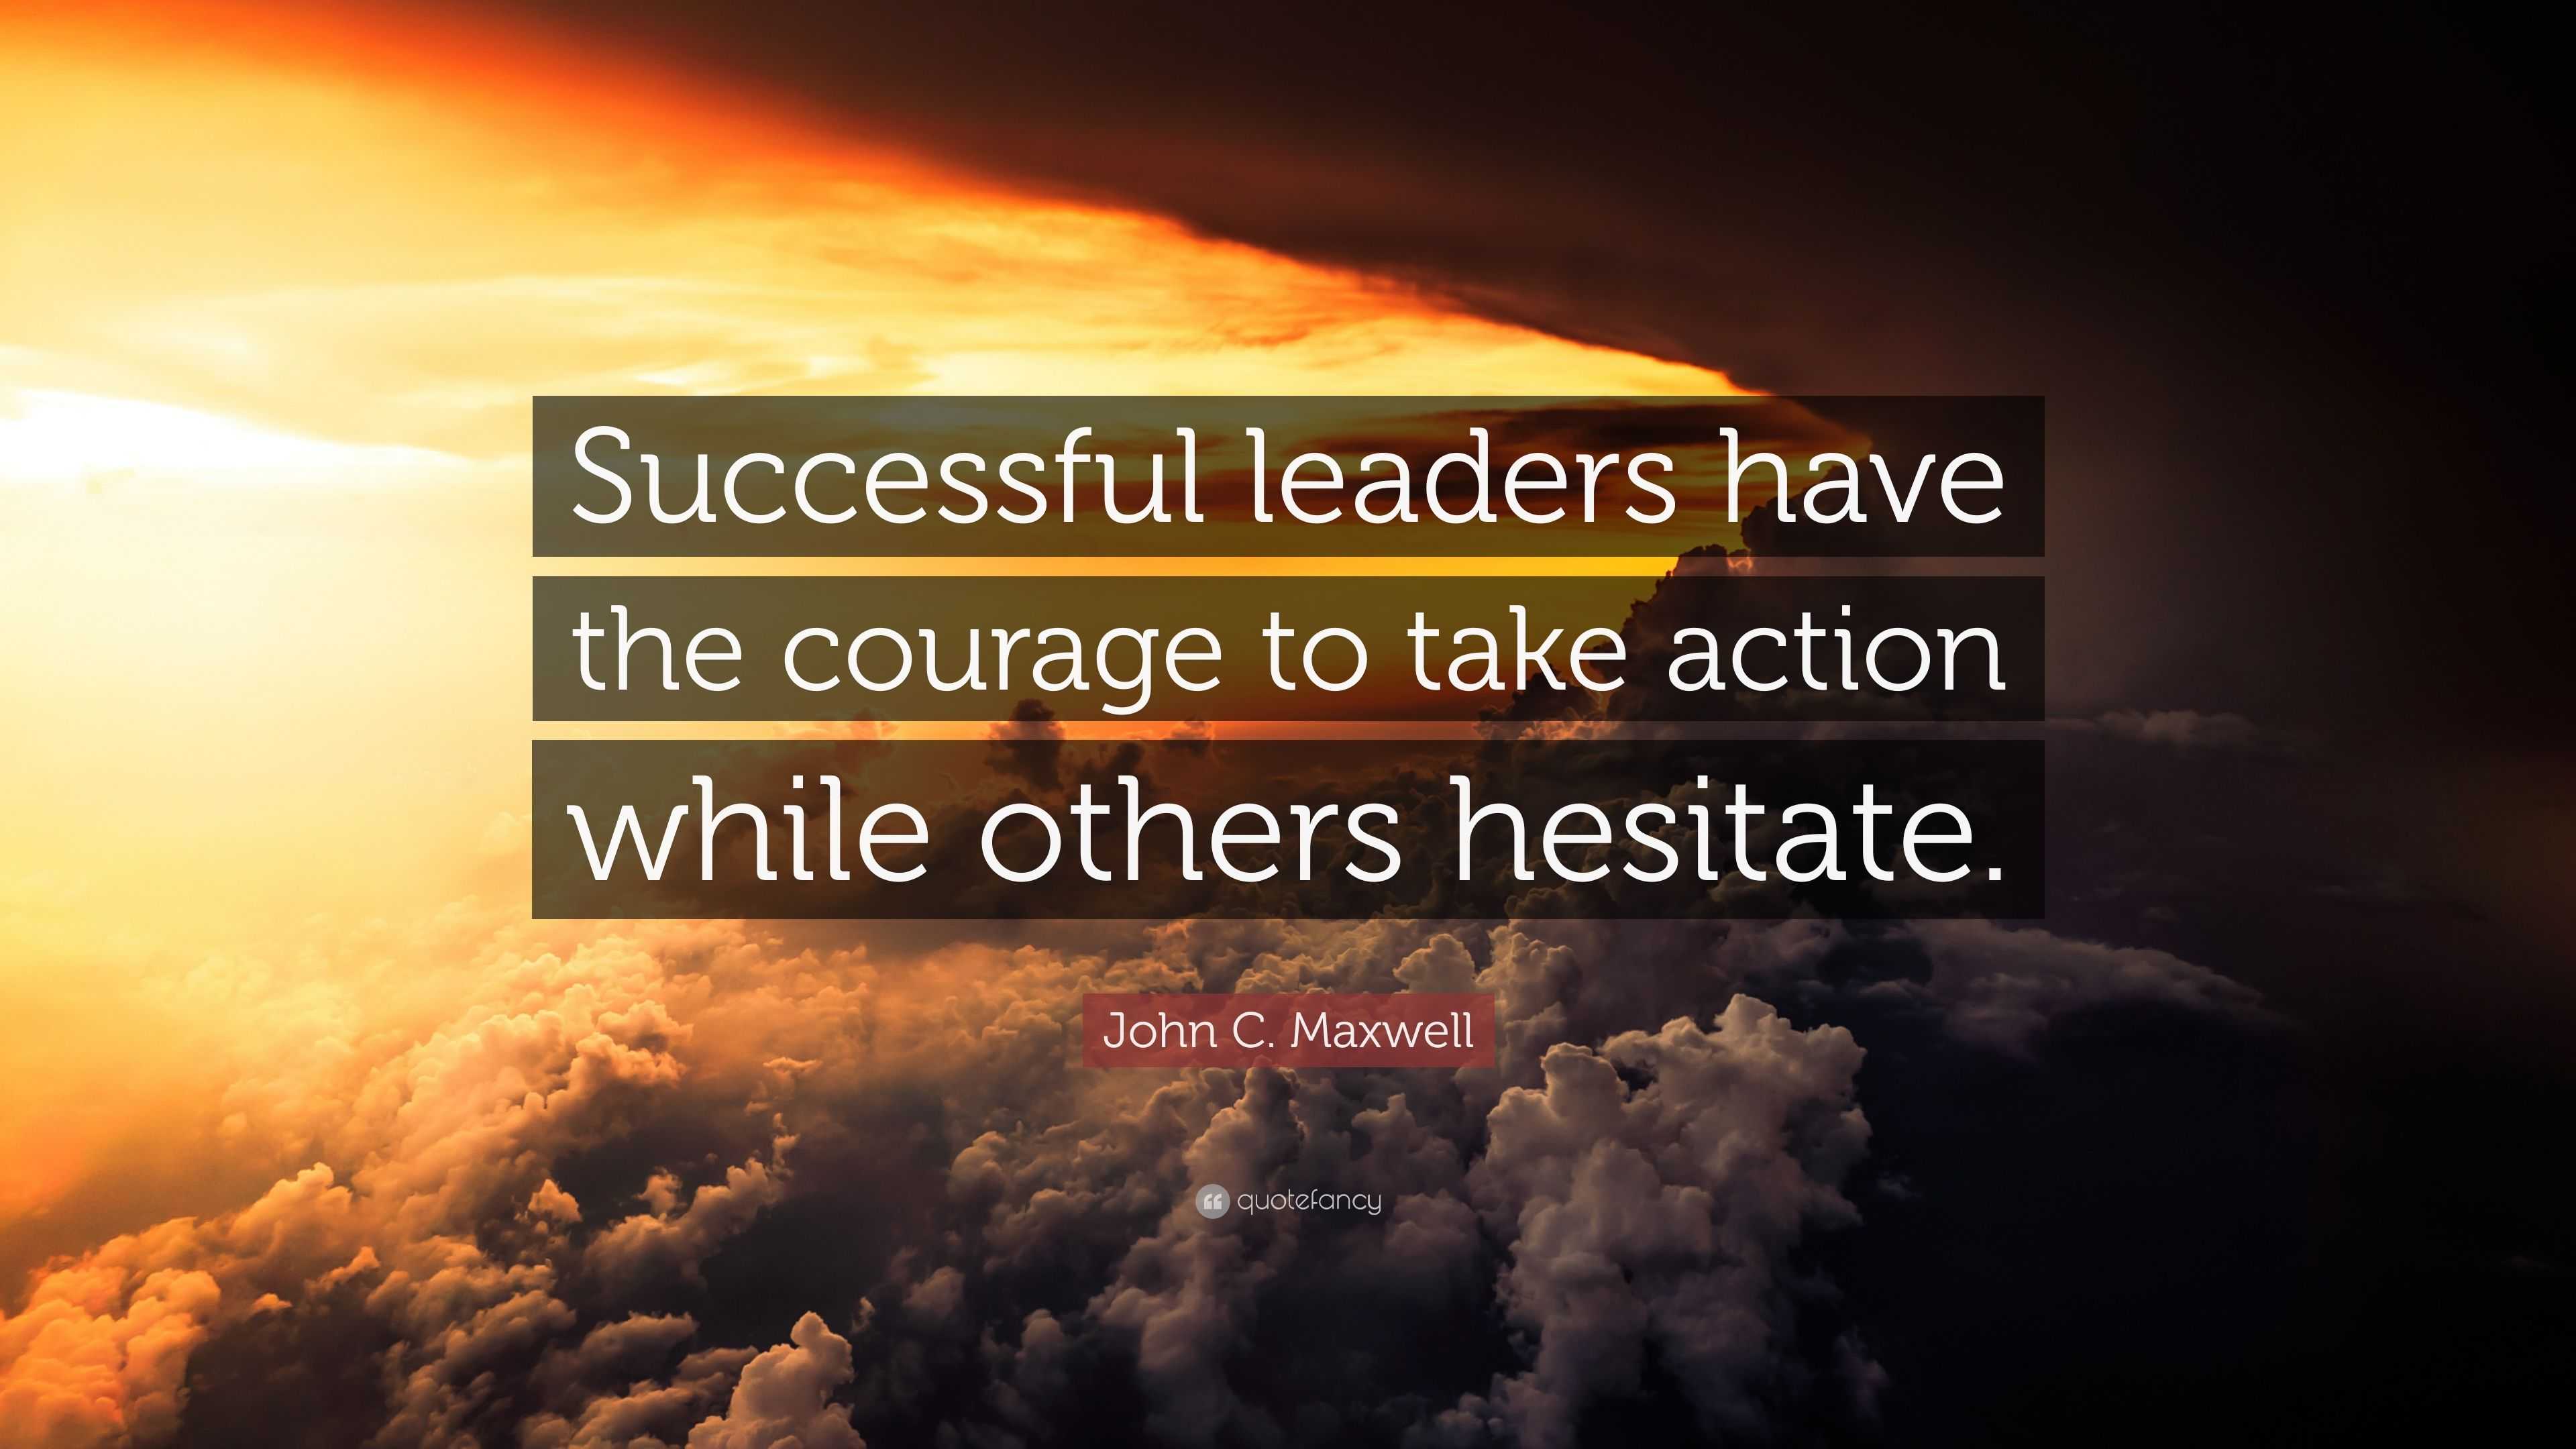 John C. Maxwell Quote: "Successful leaders have the ...